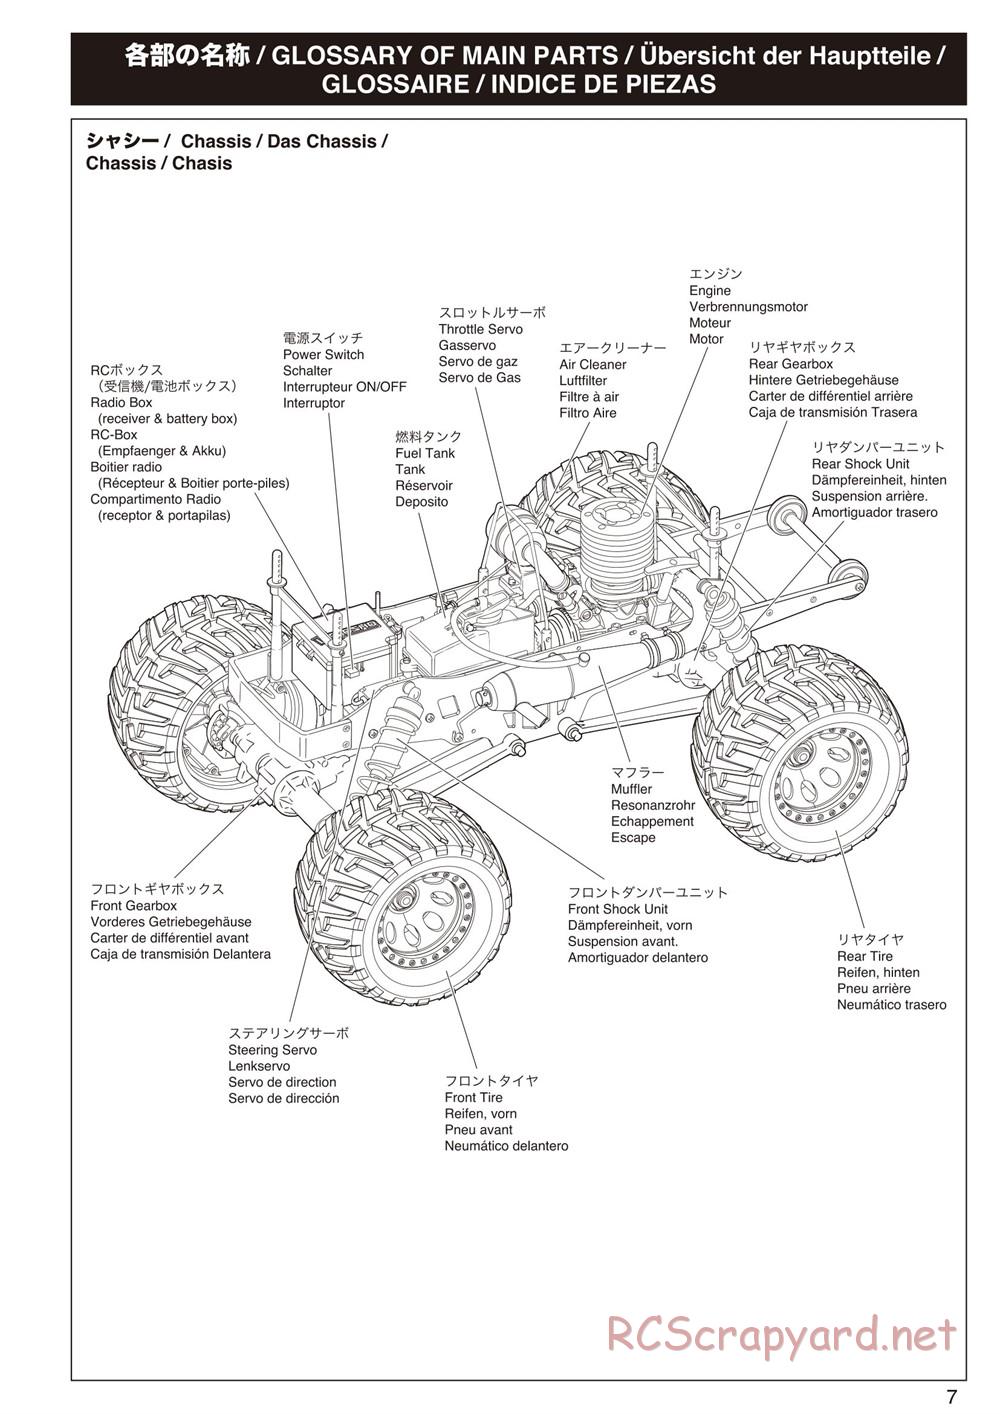 Kyosho - Mad Force Kruiser 2.0 - Manual - Page 7